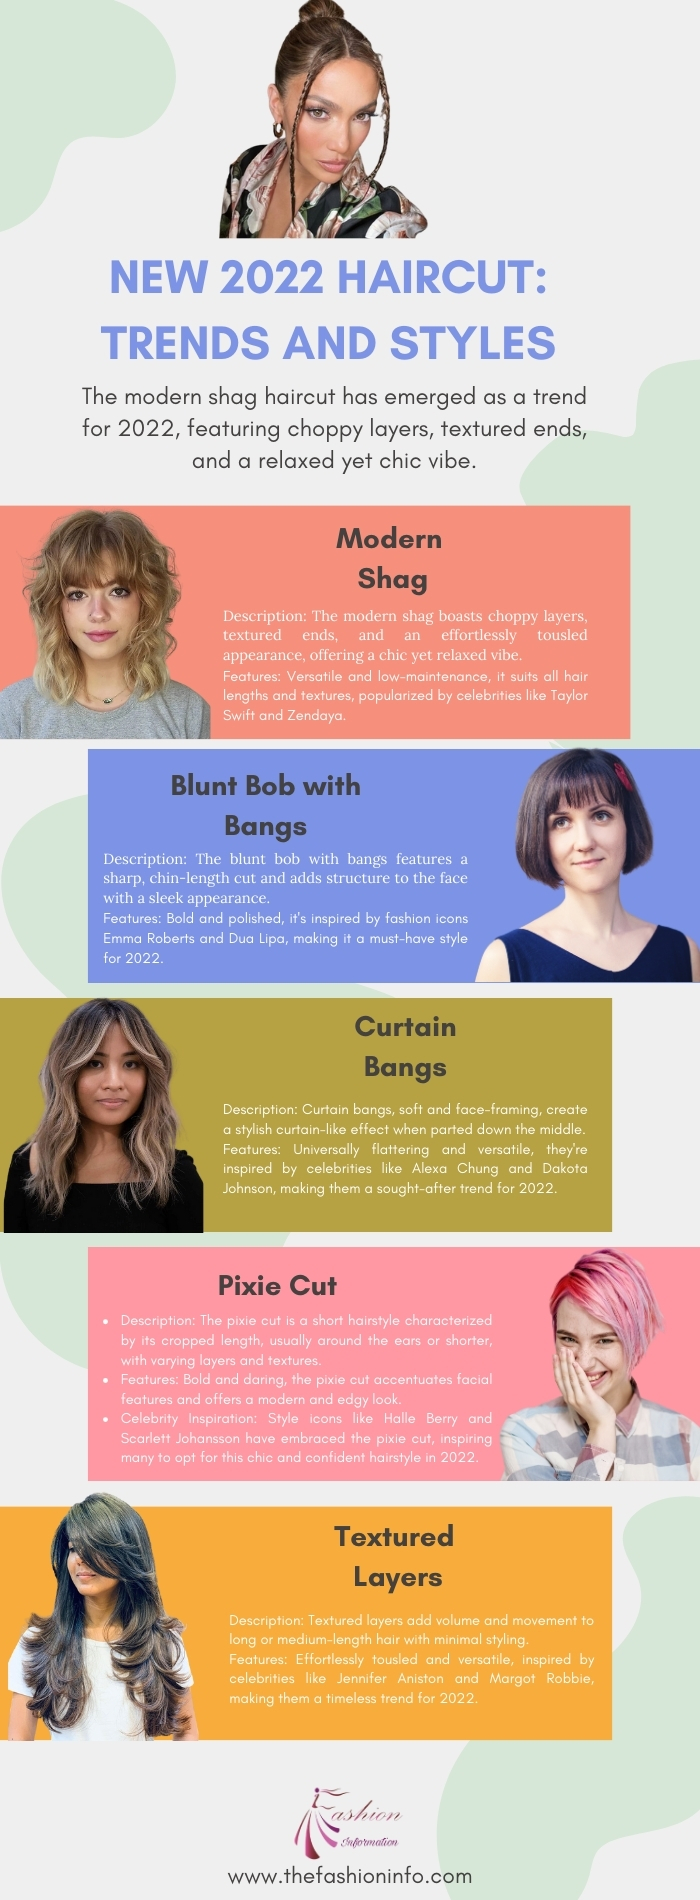 New 2022 Haircut Trends and Styles